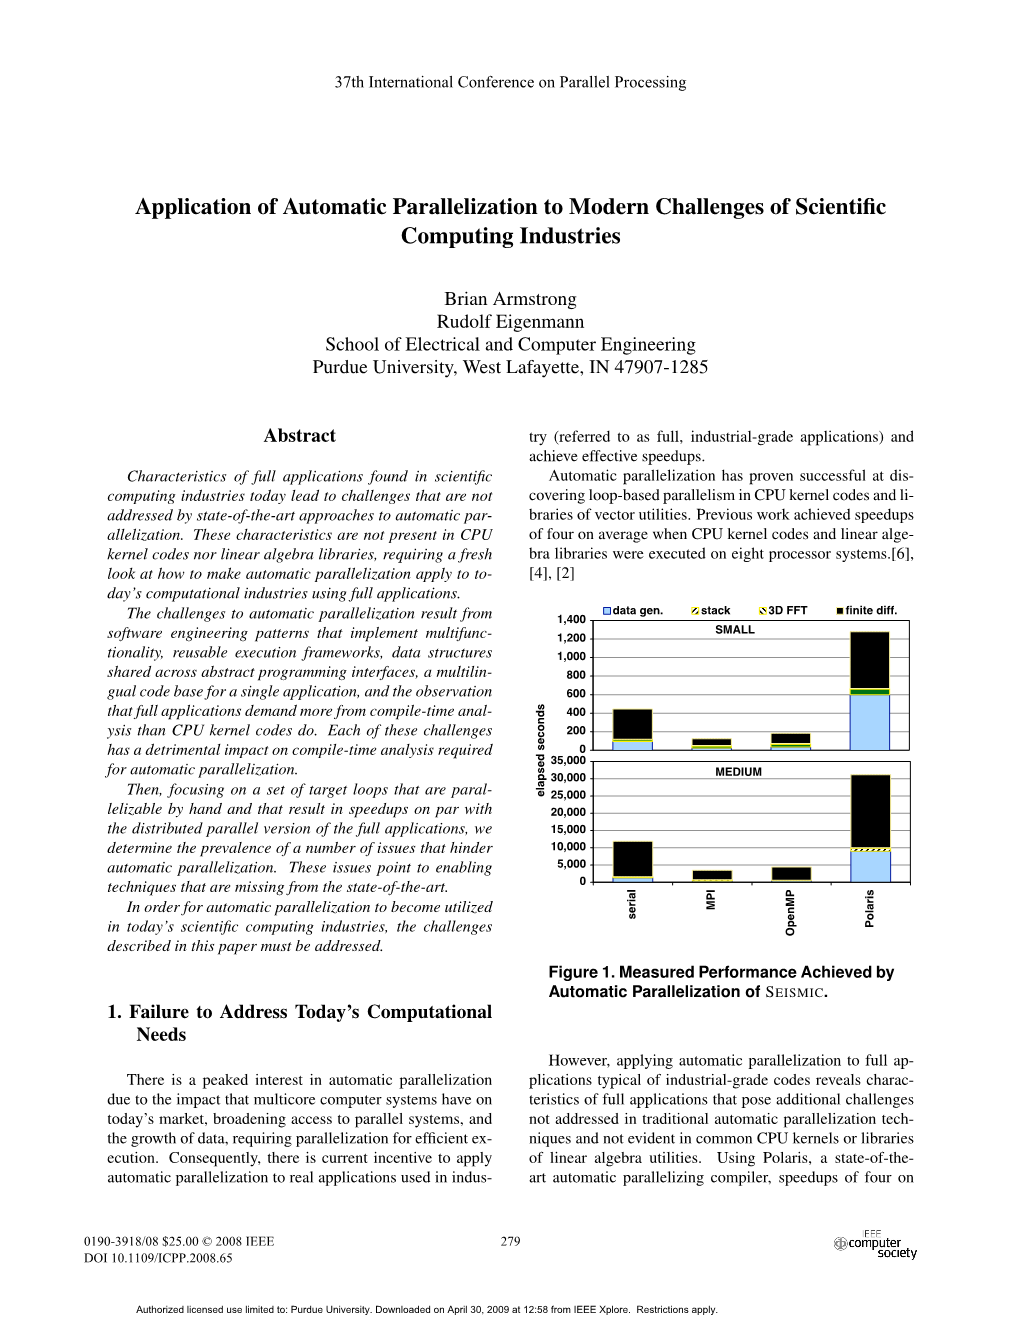 Application of Automatic Parallelization to Modern Challenges of Scientiﬁc Computing Industries